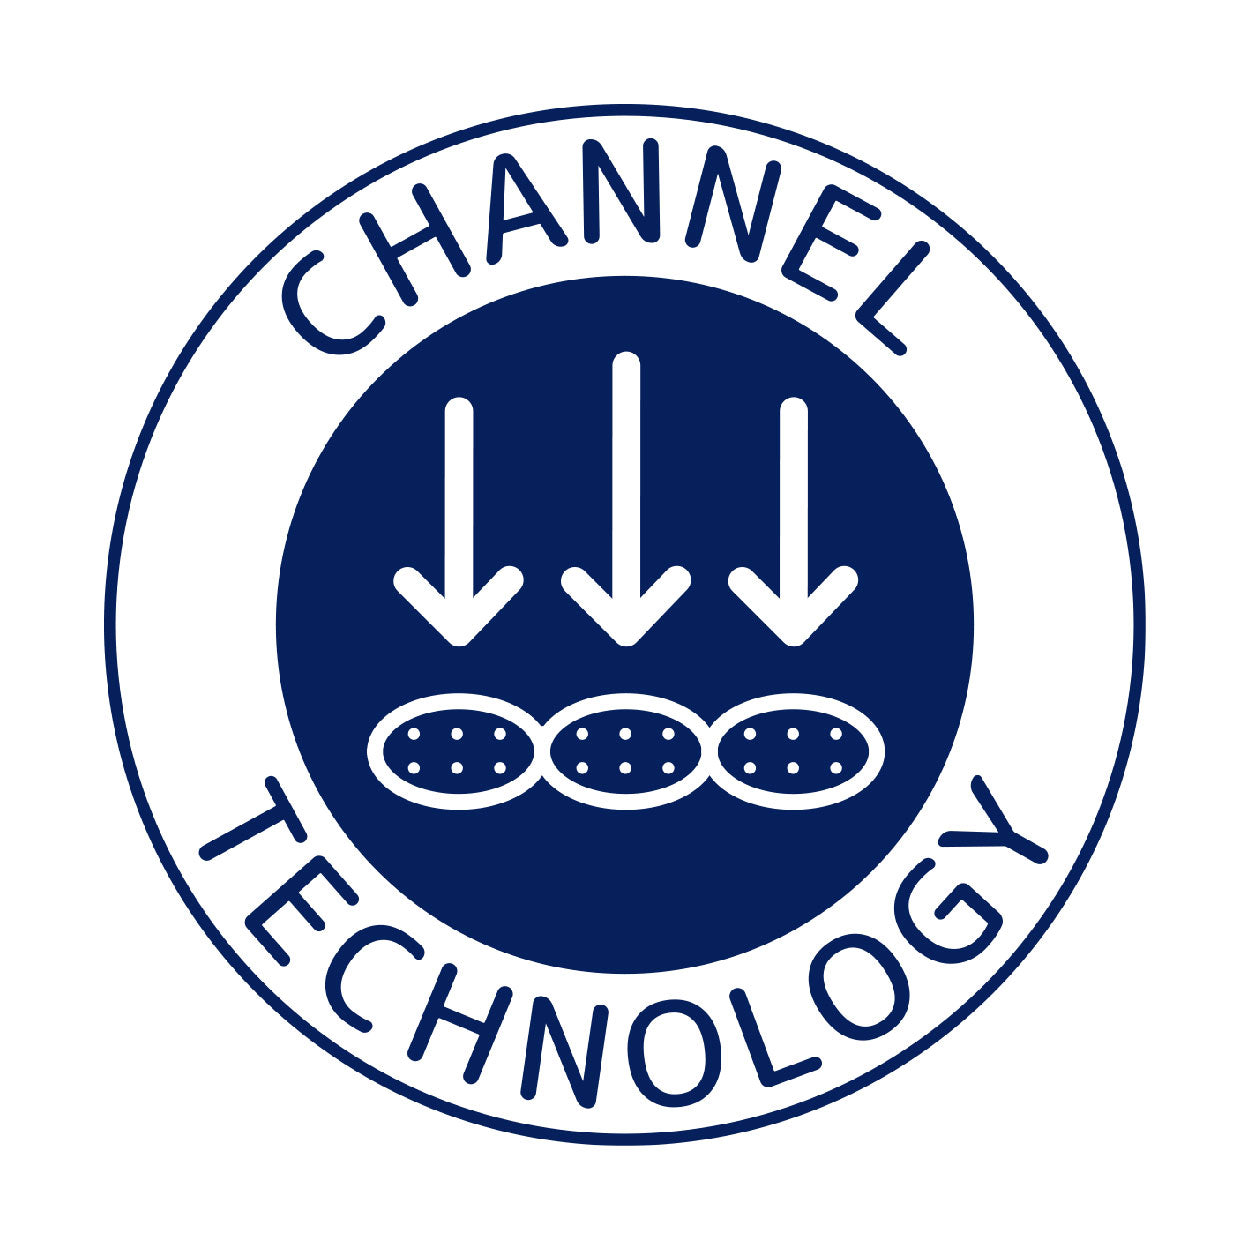 Channel technology